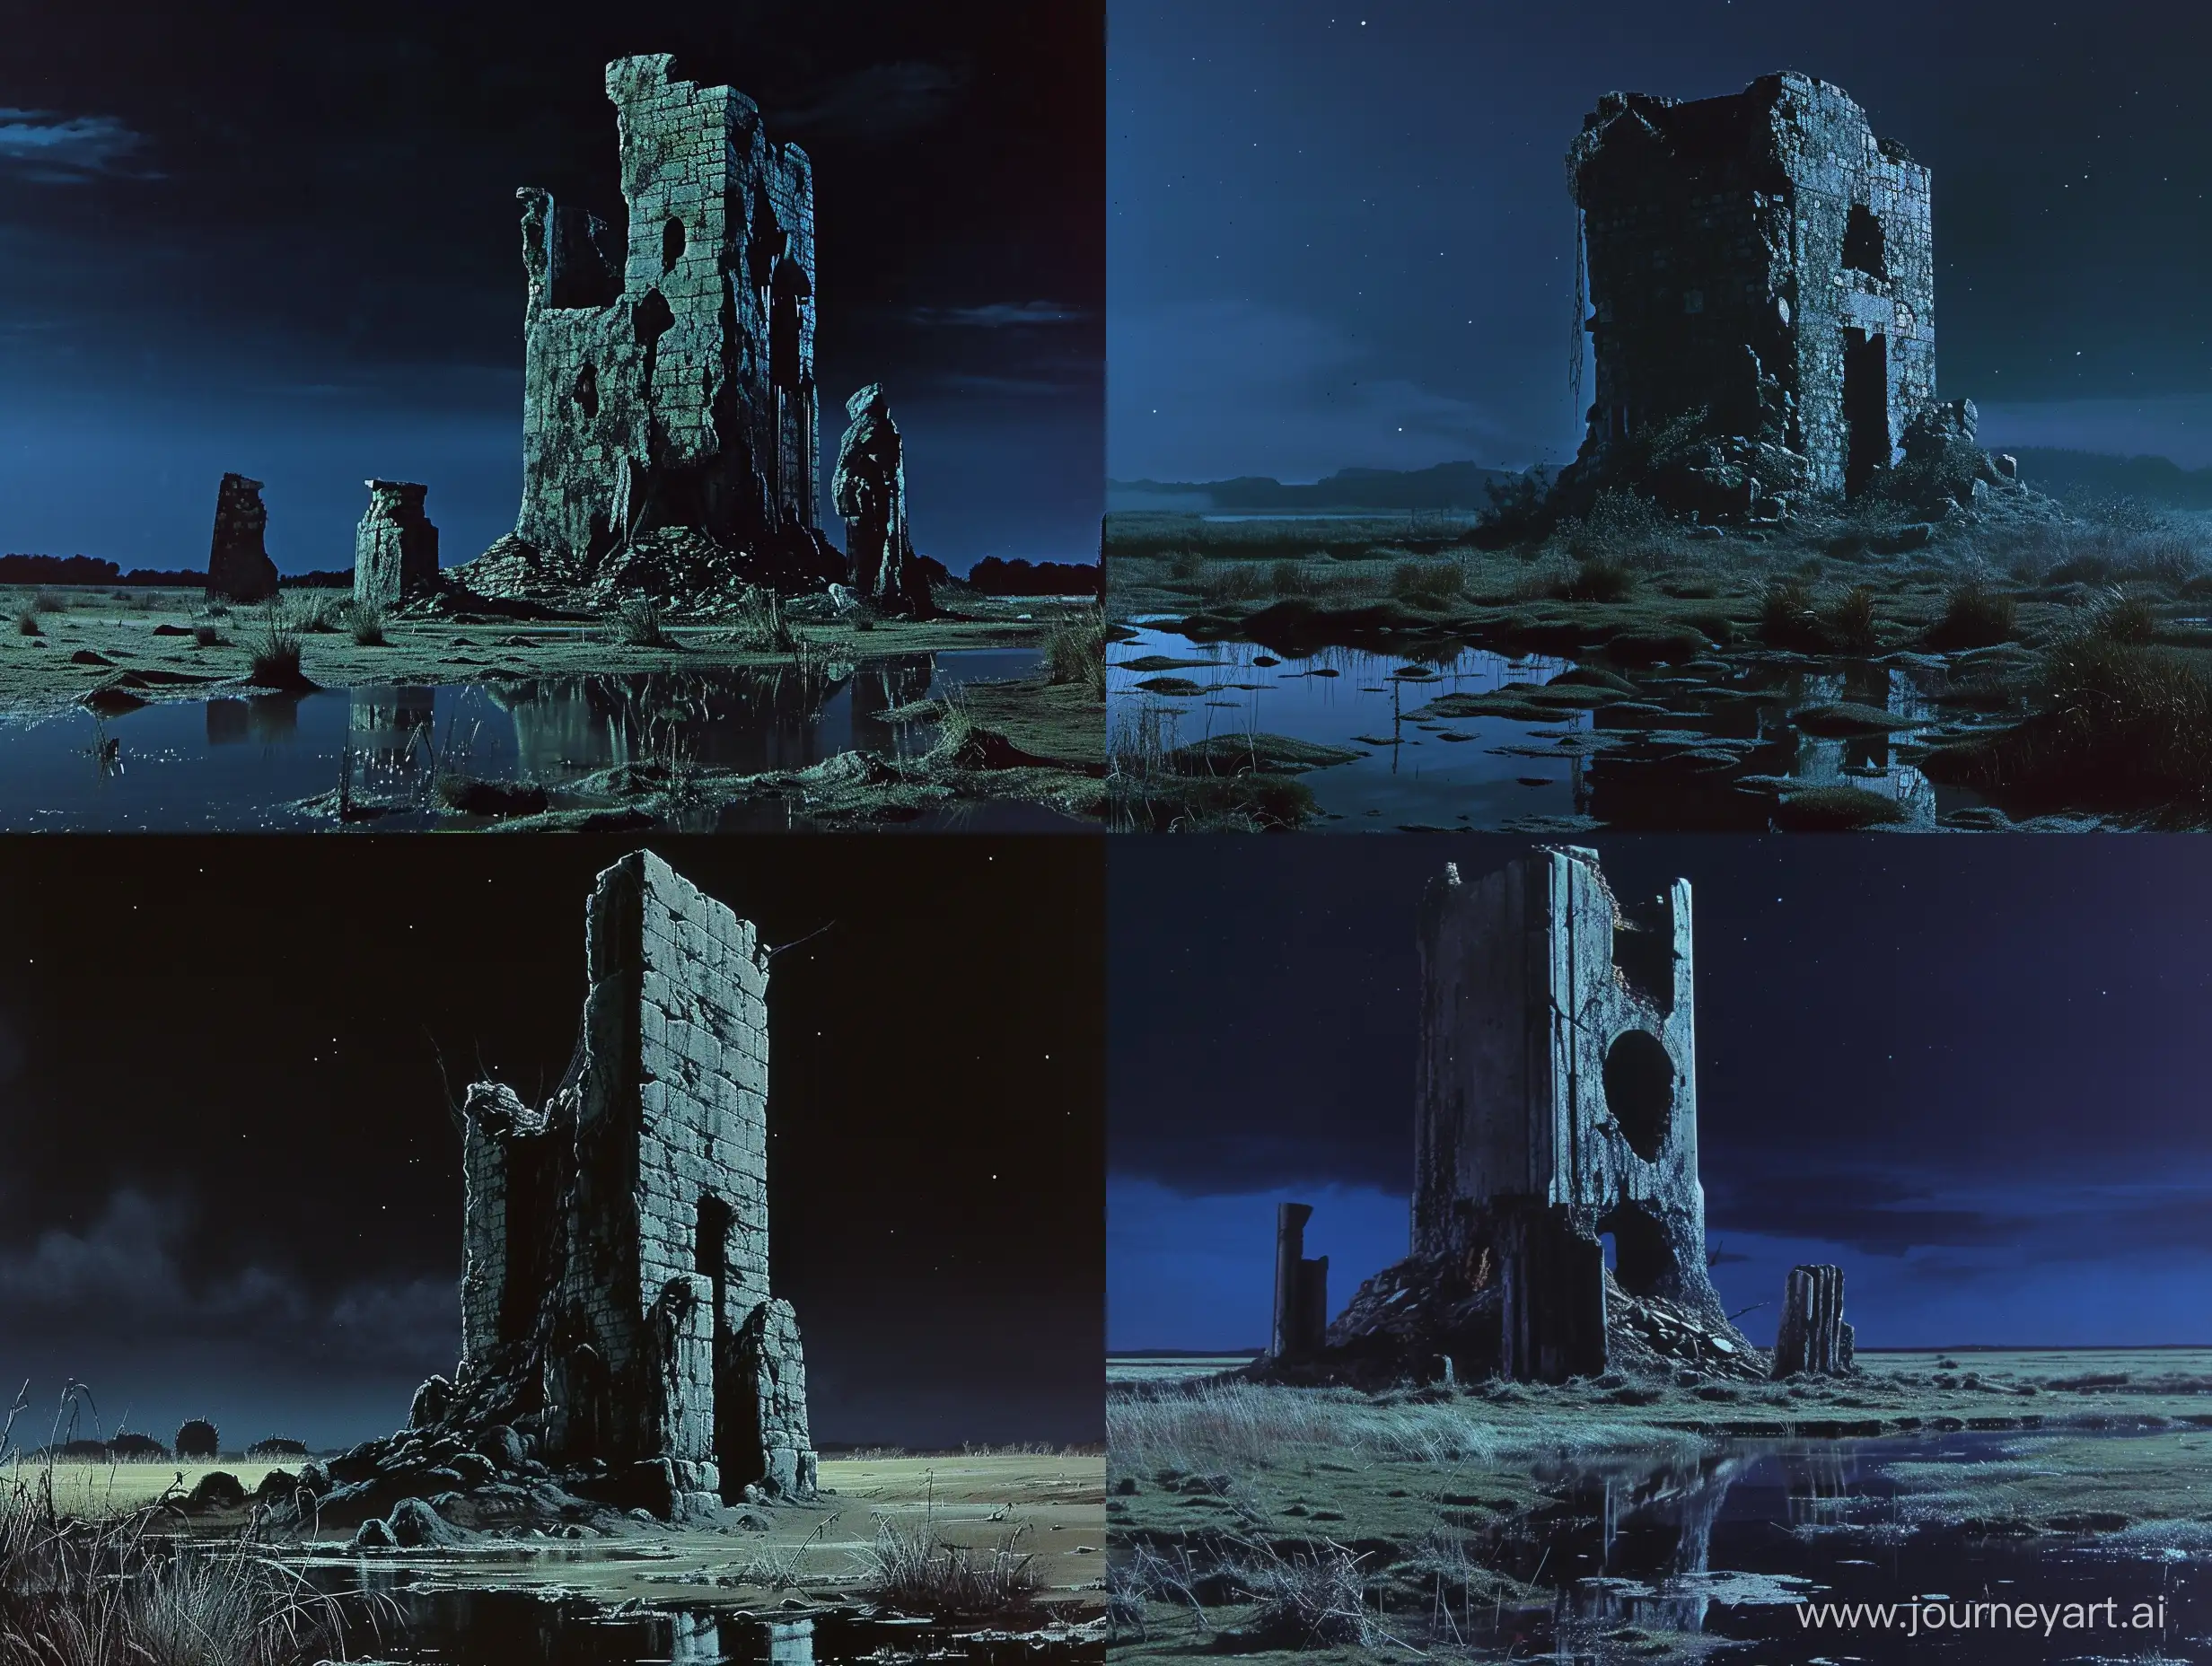 dvd screenengrabs character/arx fatalis a crumbling ancient stone work tower emerging from a swampy marshland at night dark fantasy 1980 style